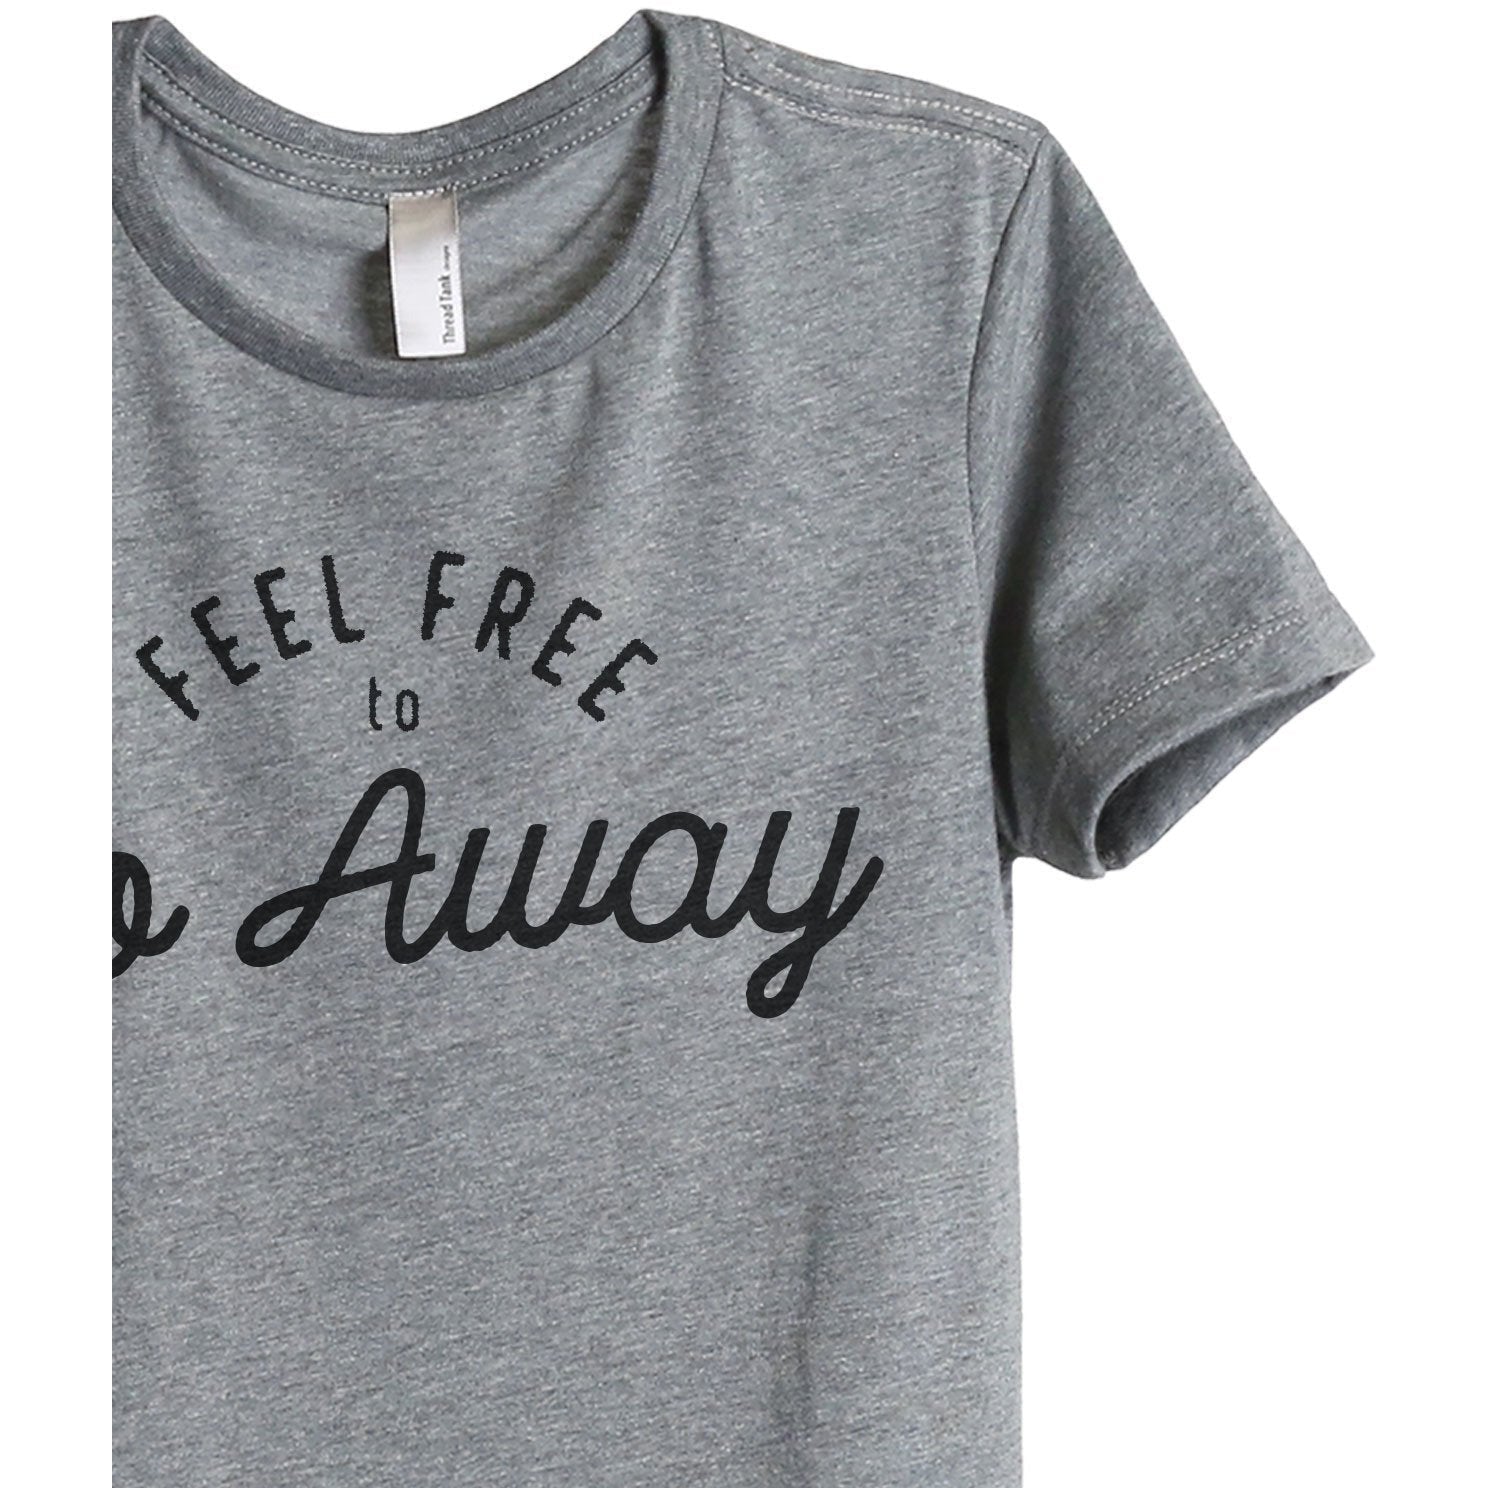 Feel Free To Go Away Women's Relaxed Crewneck T-Shirt Top Tee Heather Grey Zoom Details
